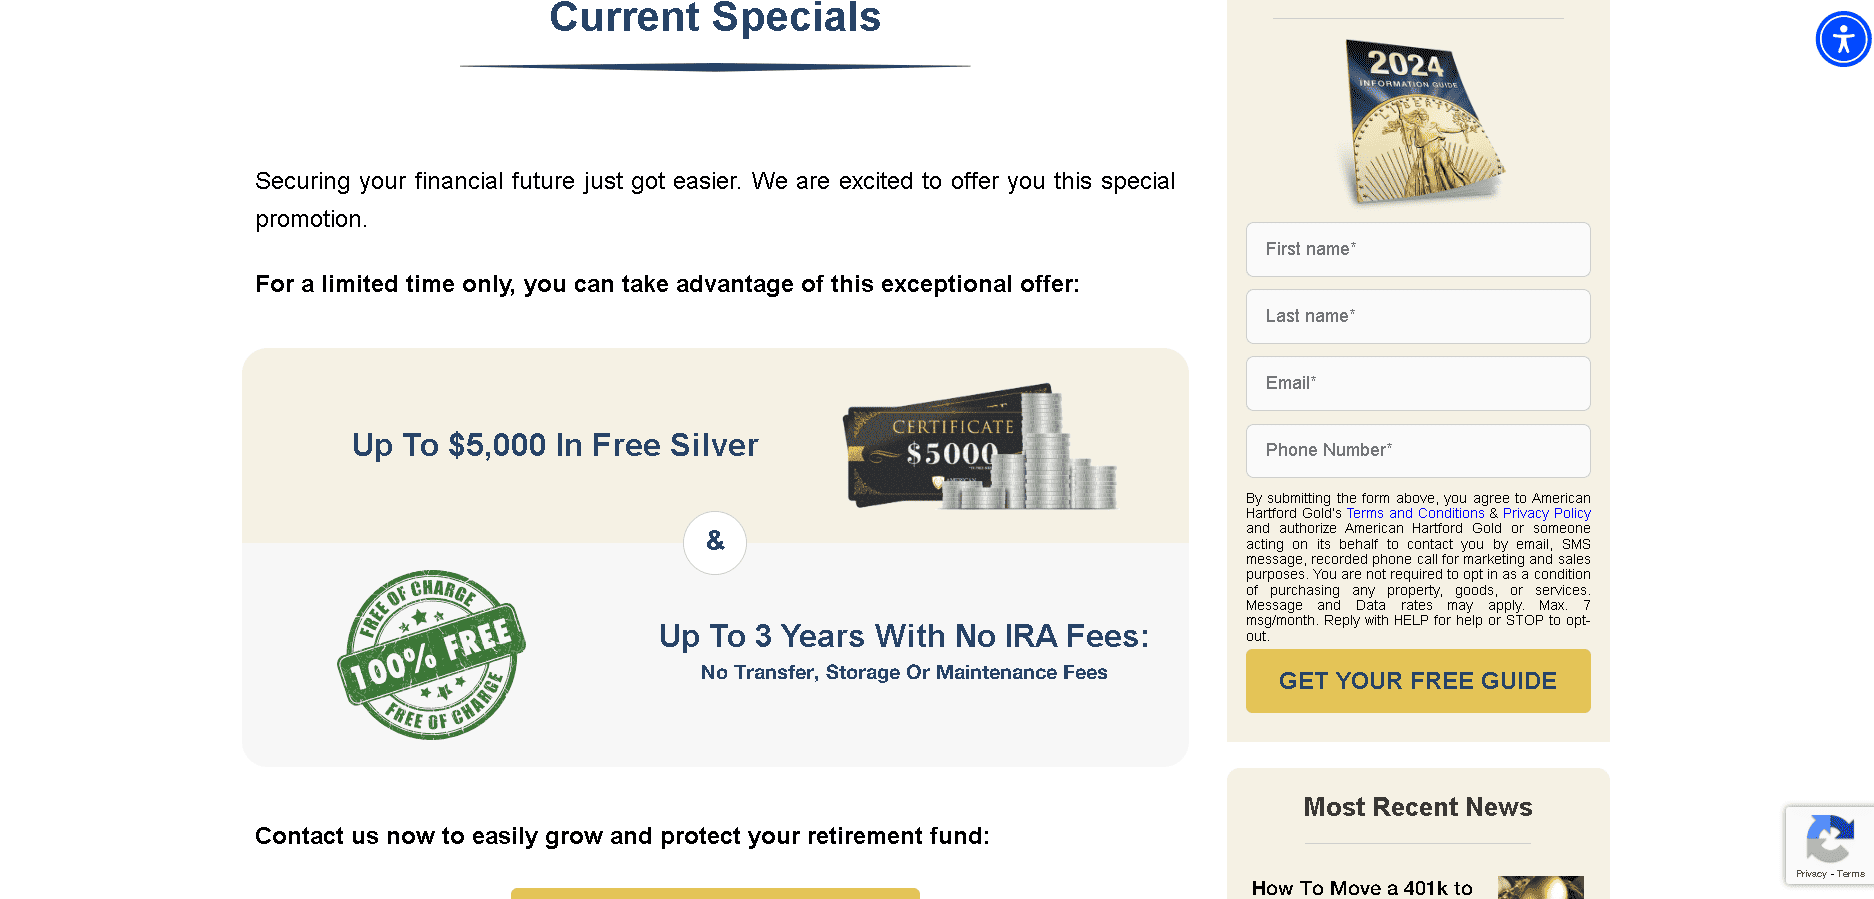 American Hartford Gold offer free silver on qualified gold IRA purchases